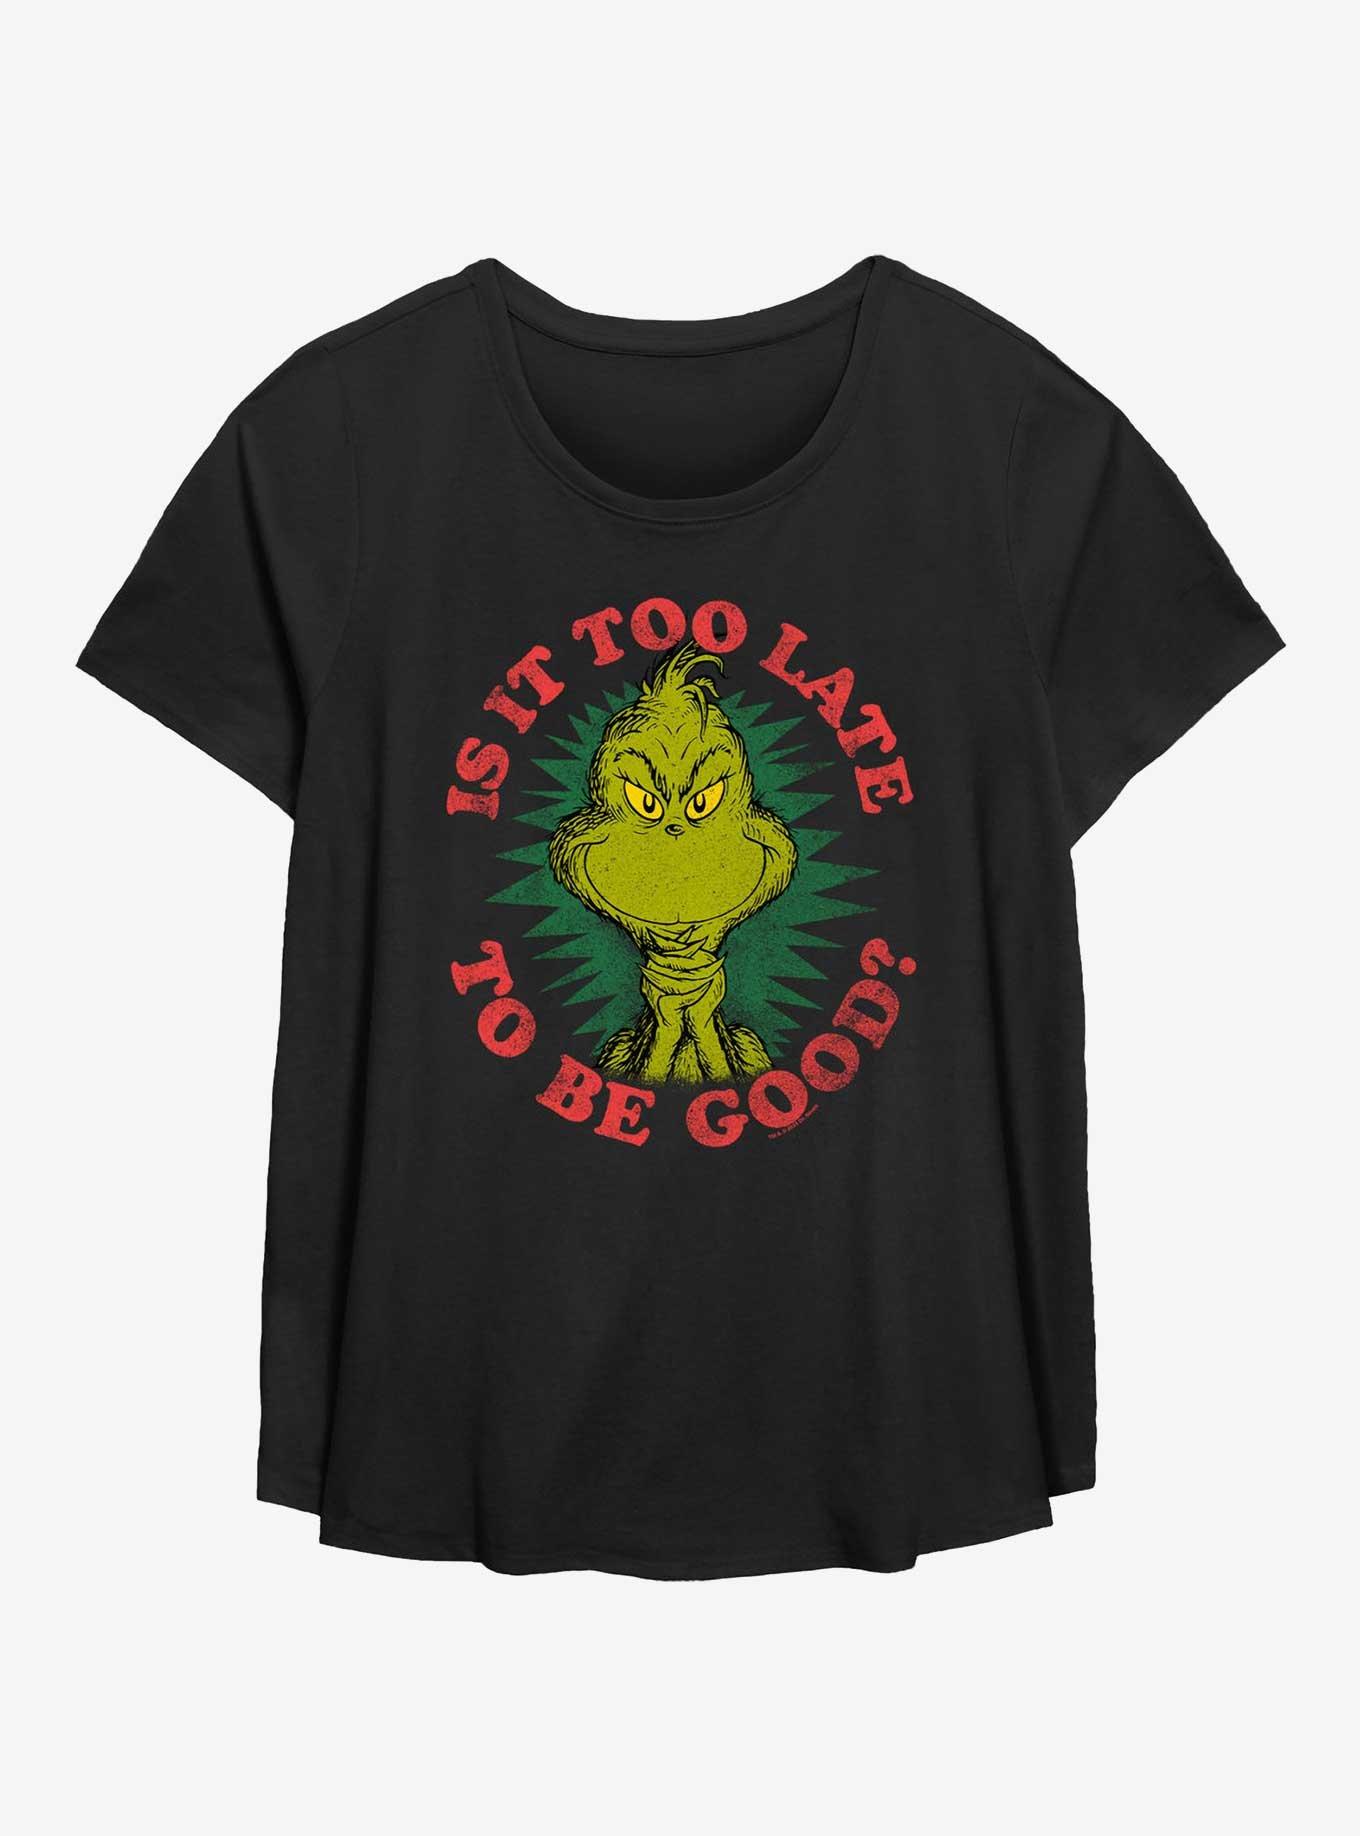 Dr. Seuss How The Grinch Stole Christmas Too Late To Be Good Girls T-Shirt Plus